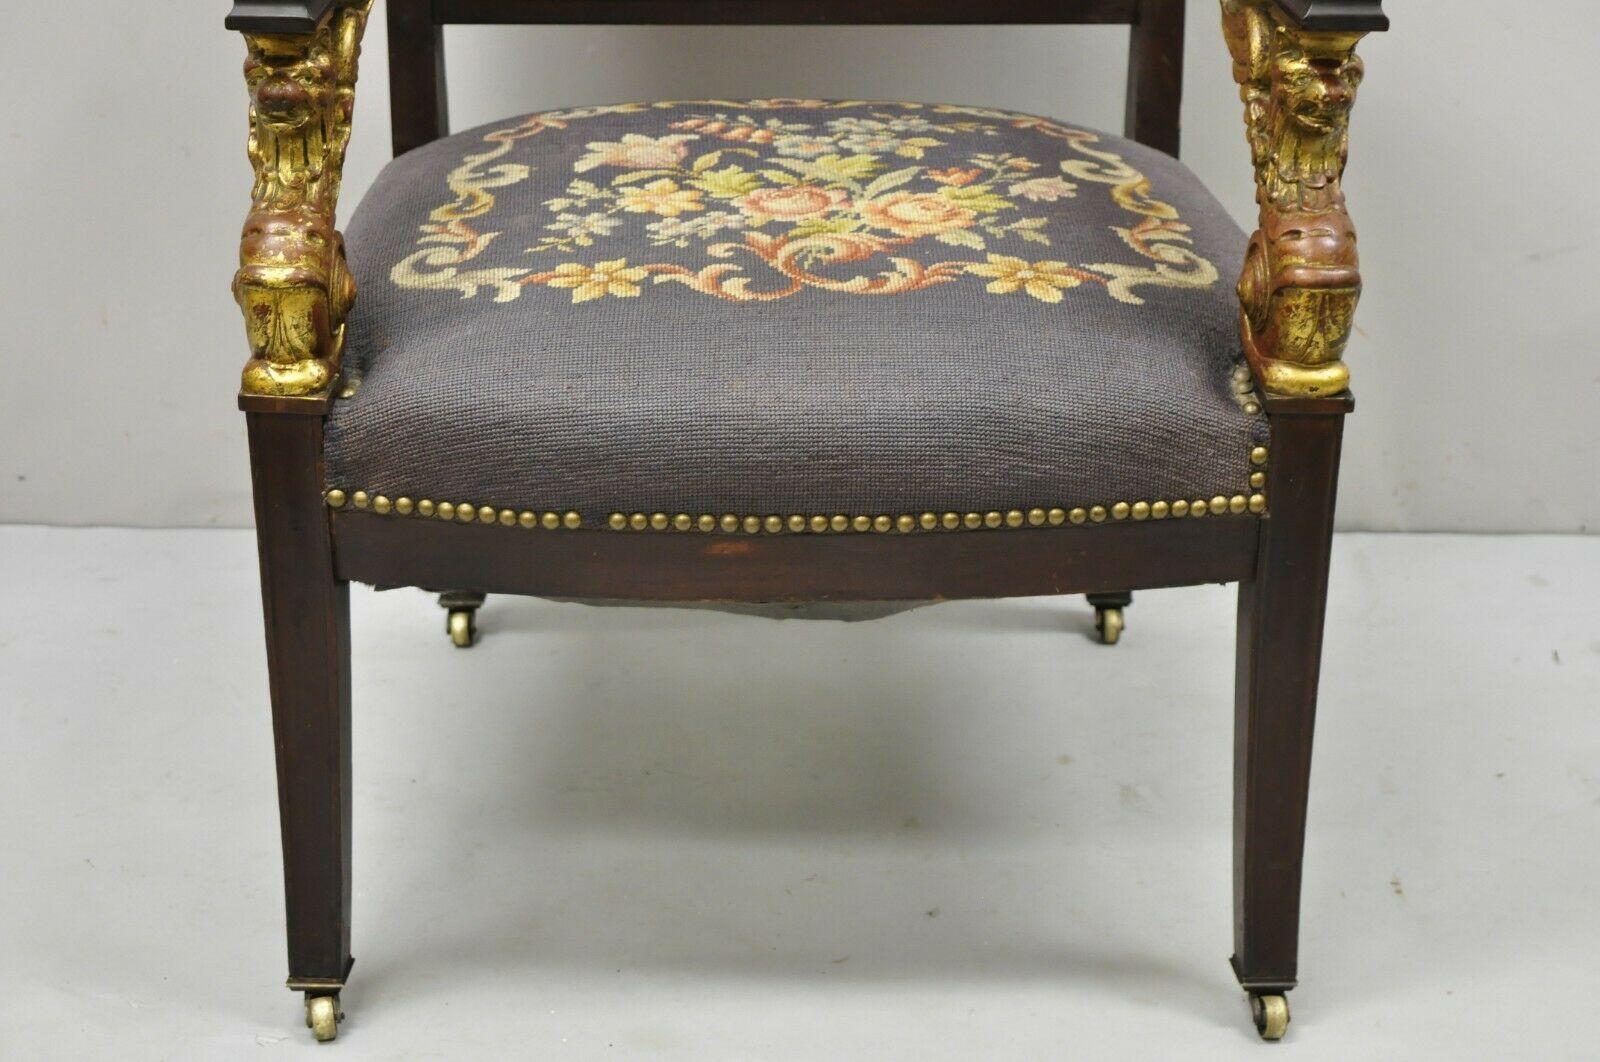 Antique French Empire Giltwood Winged Griffin Needlepoint Inlay Parlor Arm Chair For Sale 2